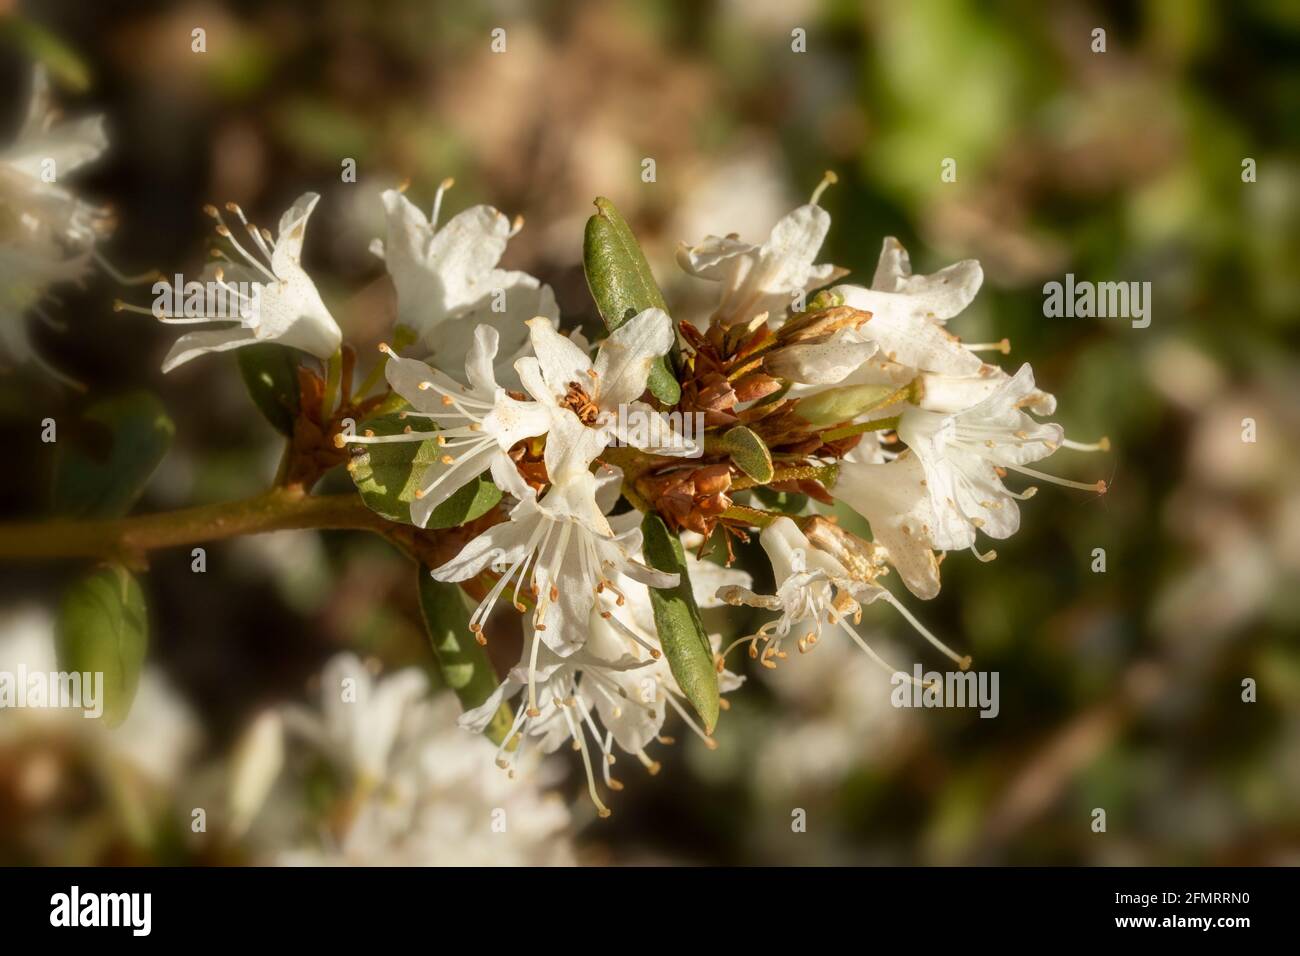 Rhodendron racemosum "White Lace", Foto Stock